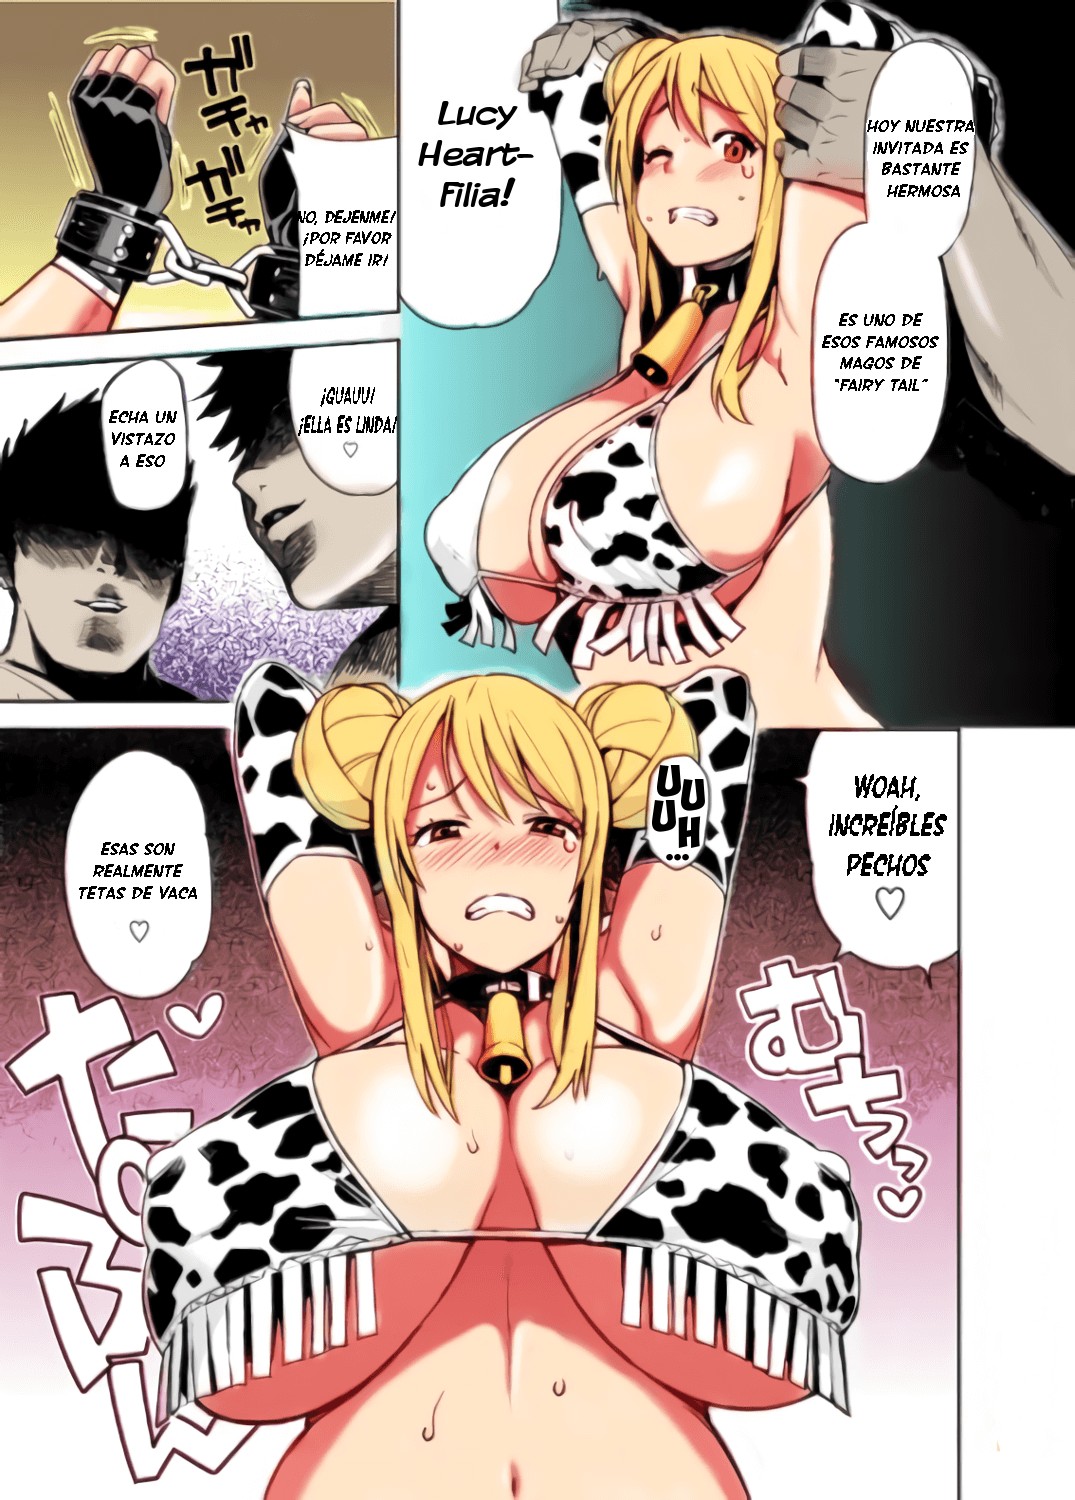 Fairy Tail Lucy Hentai Comic Porn